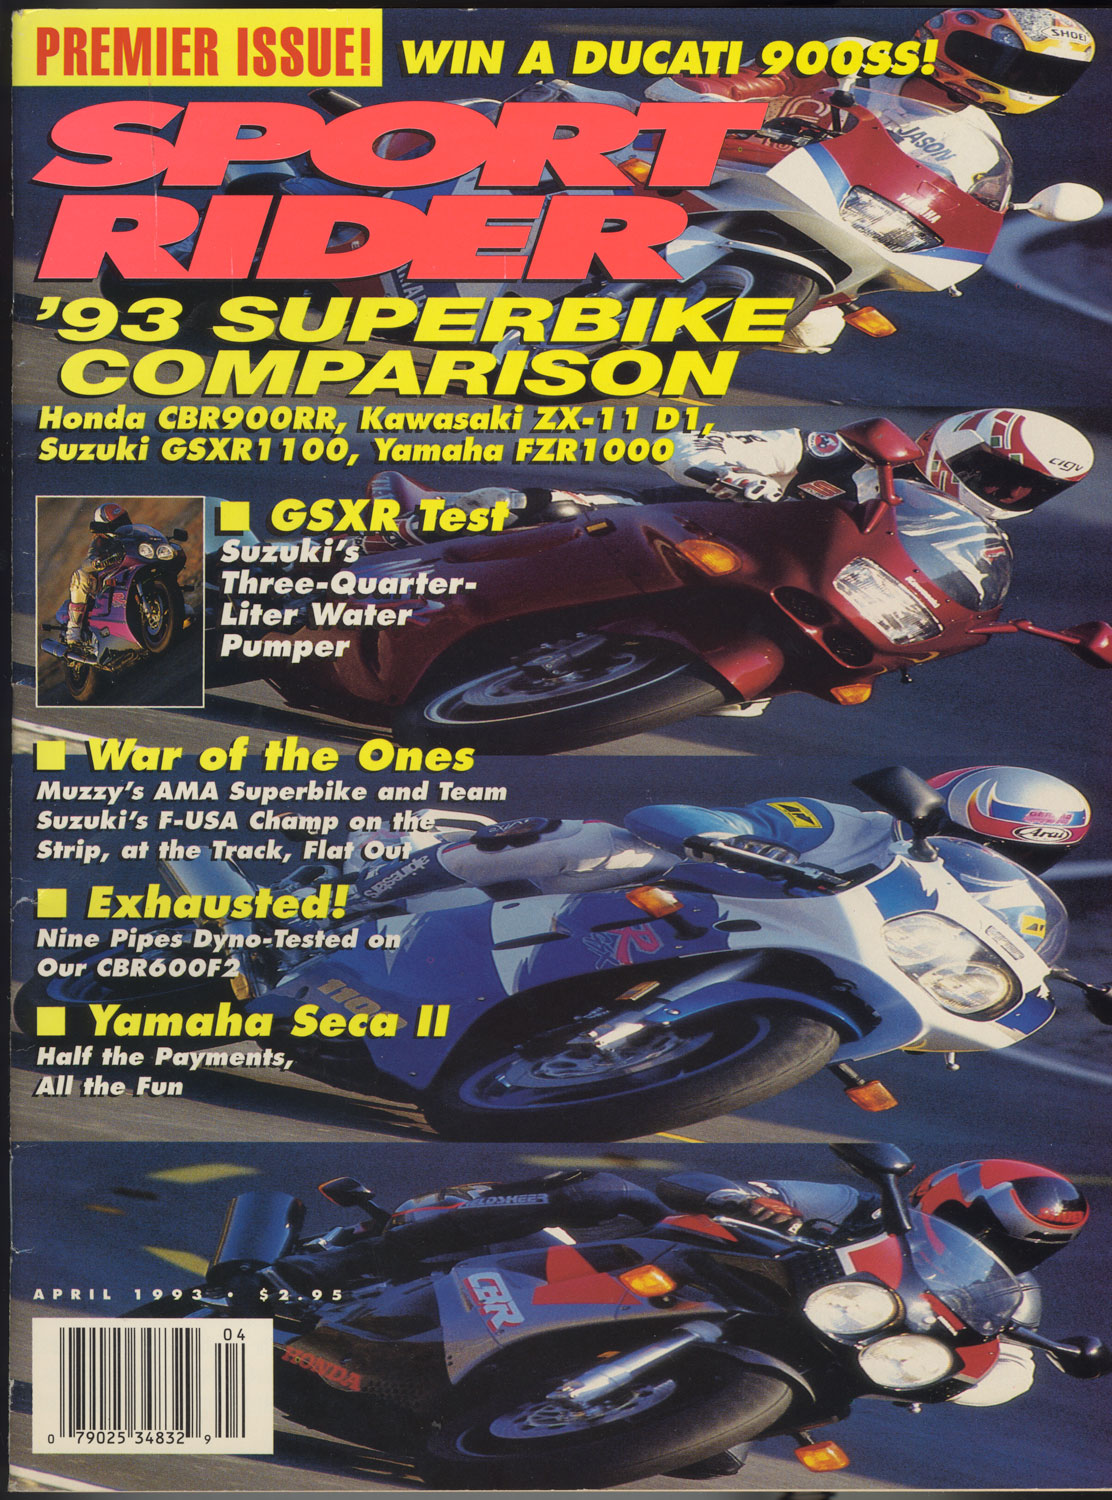 Sport Rider Covers From 1993 | Cycle World